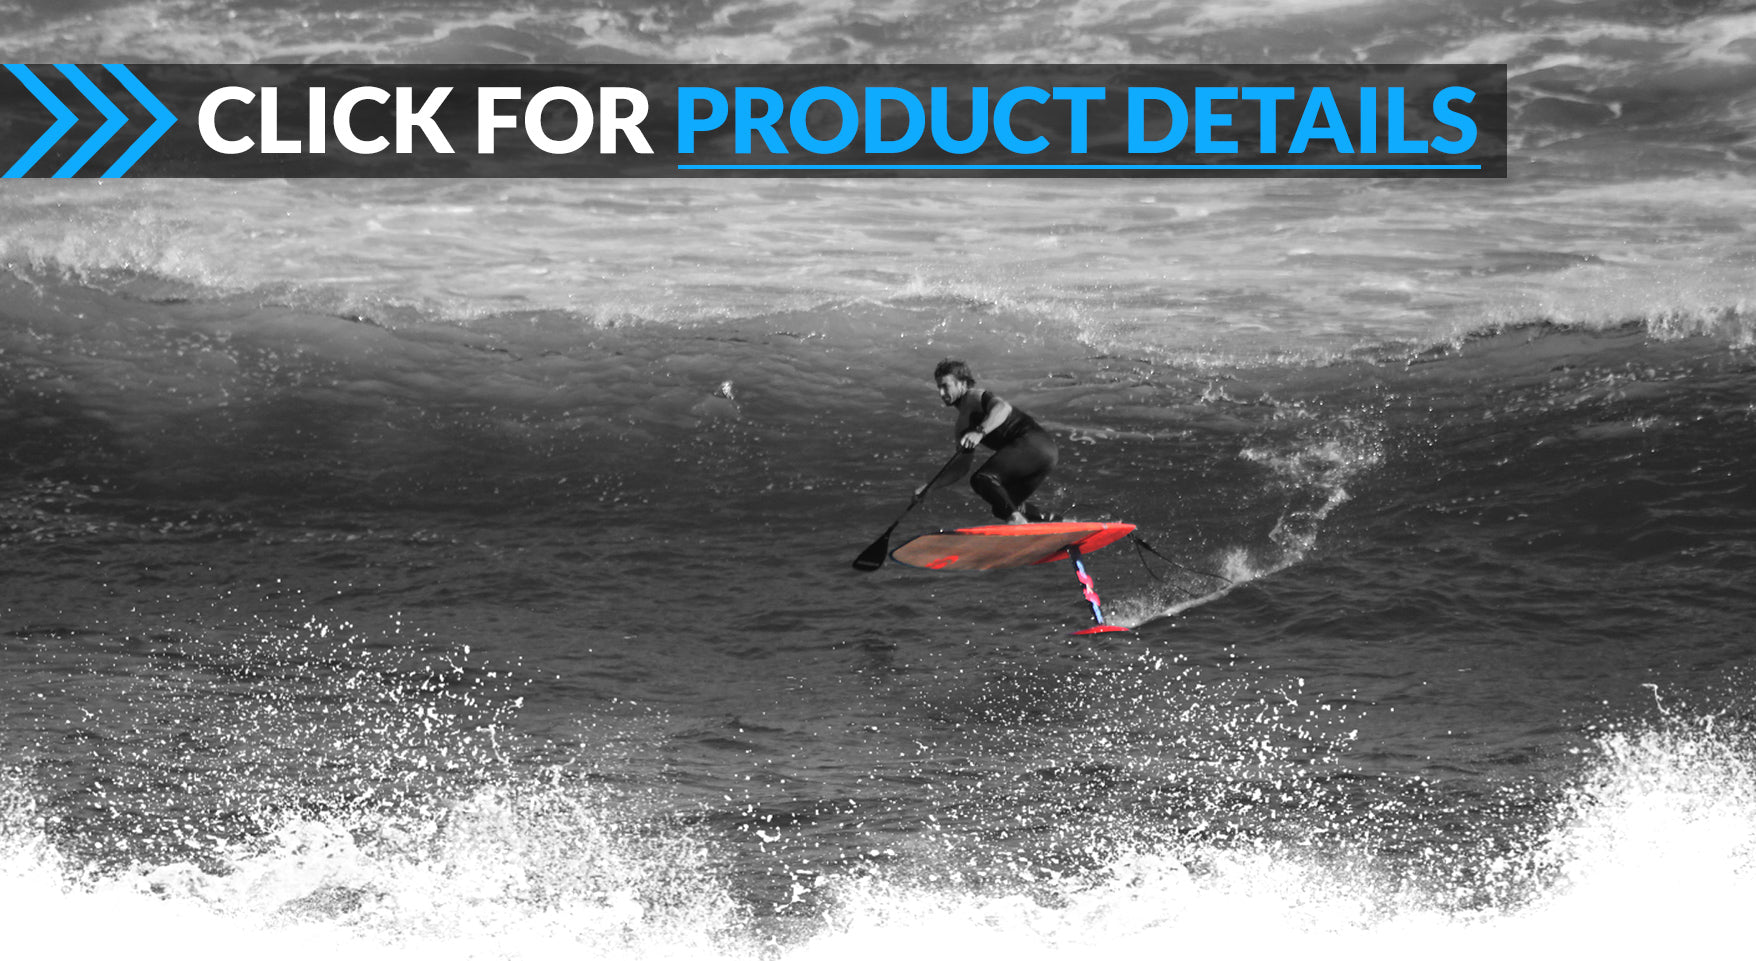 Foilboard Product Details